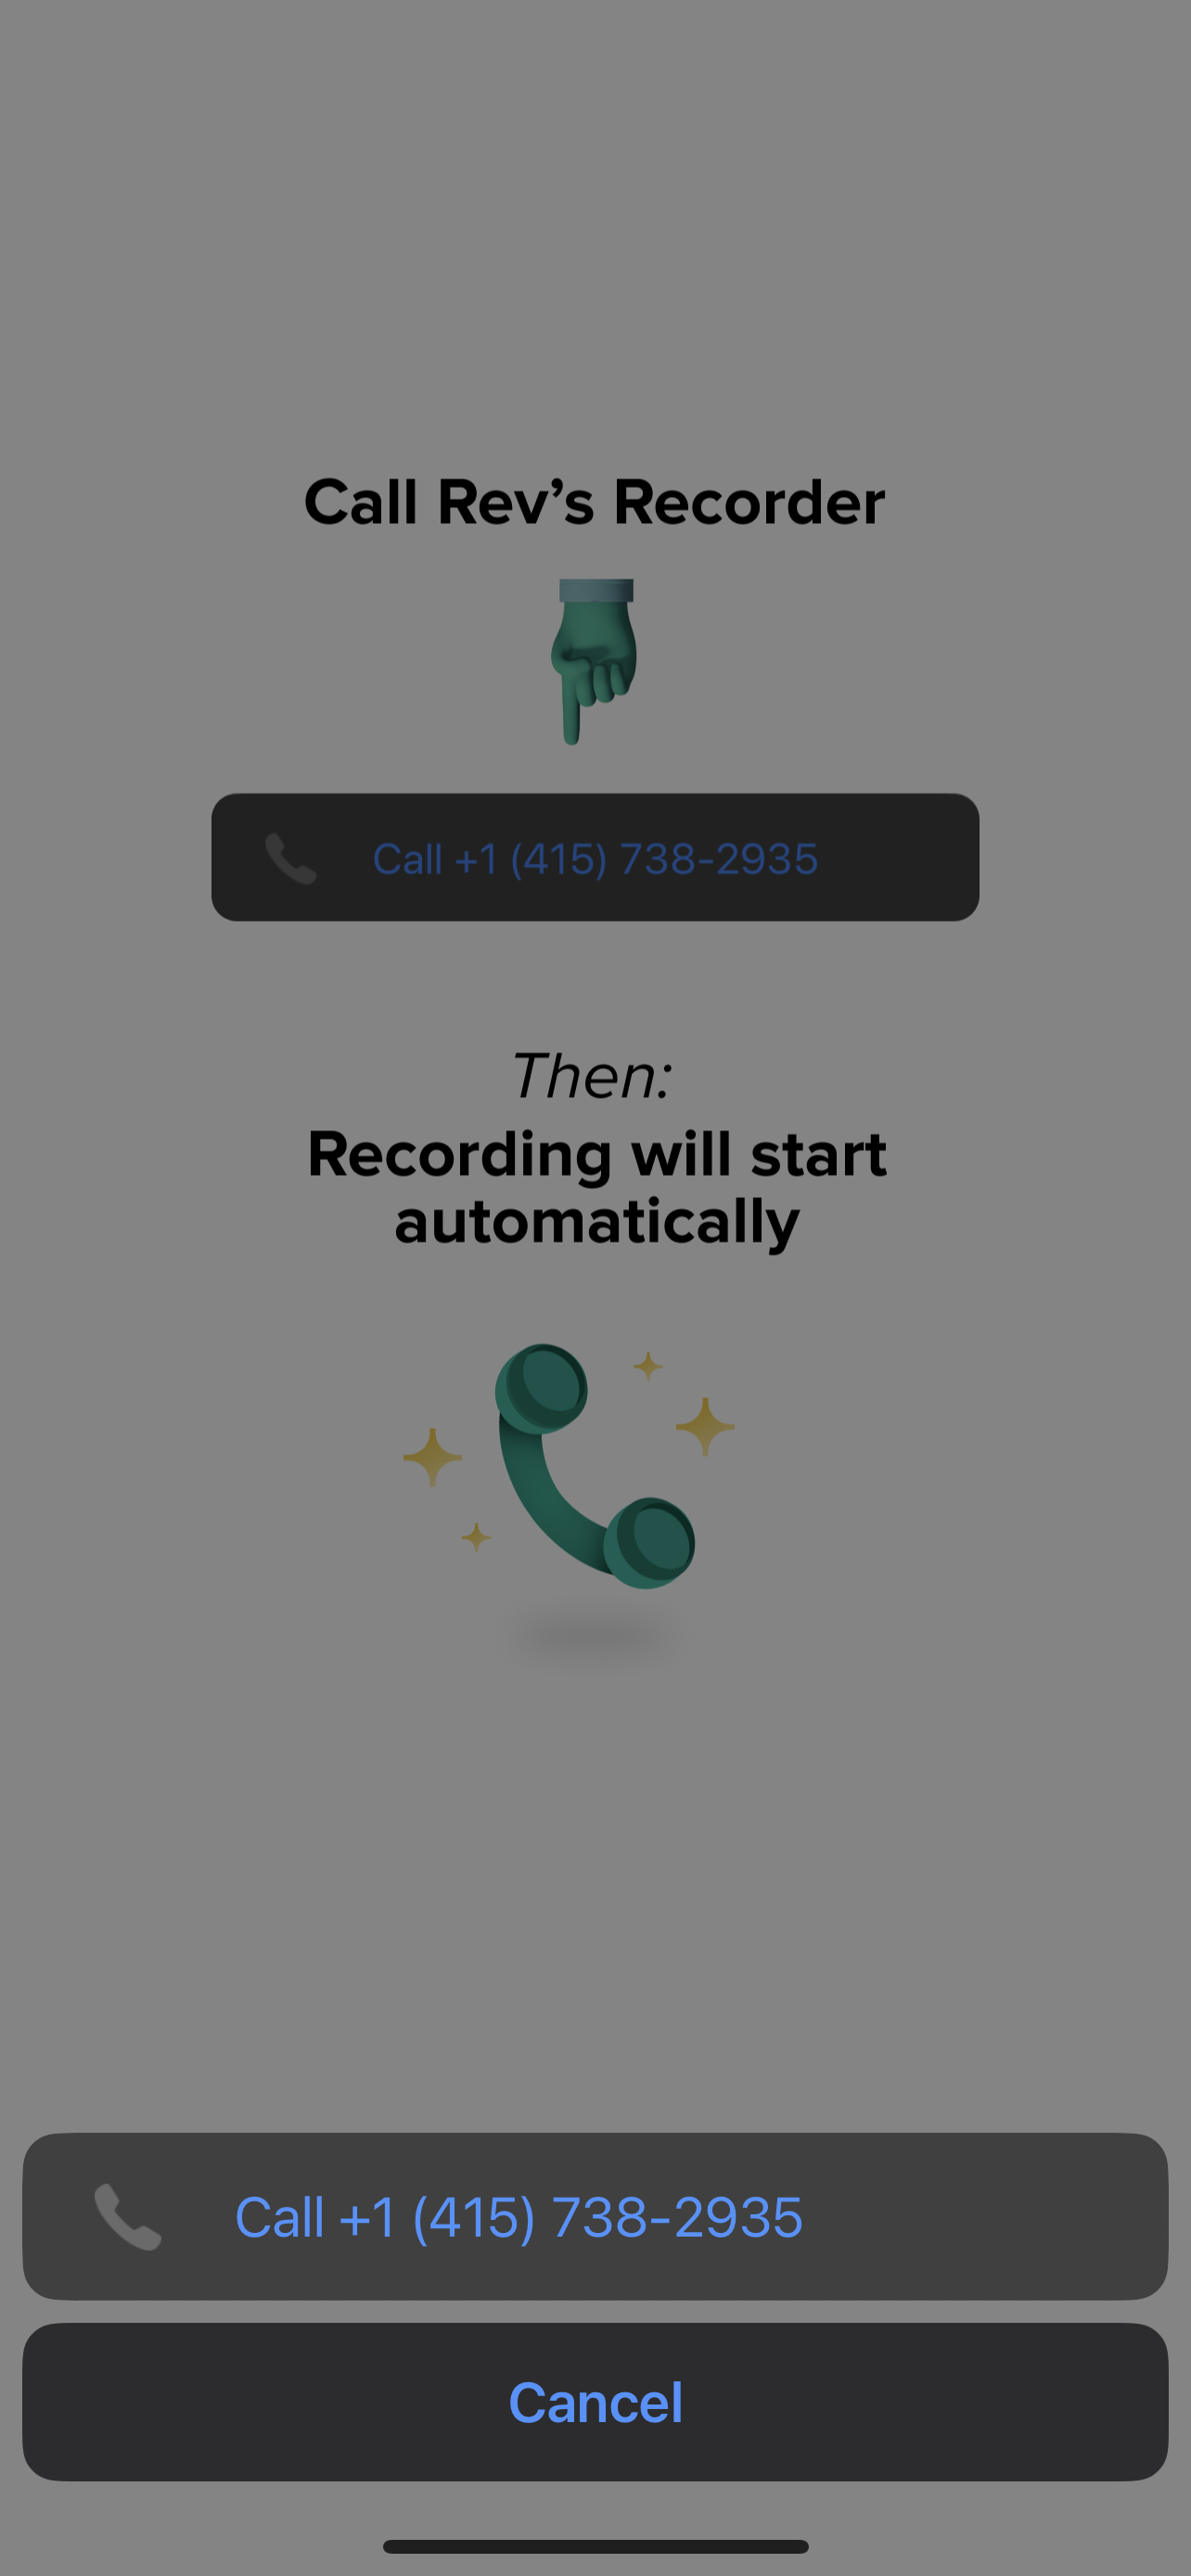 How to record phone calls on iPhone